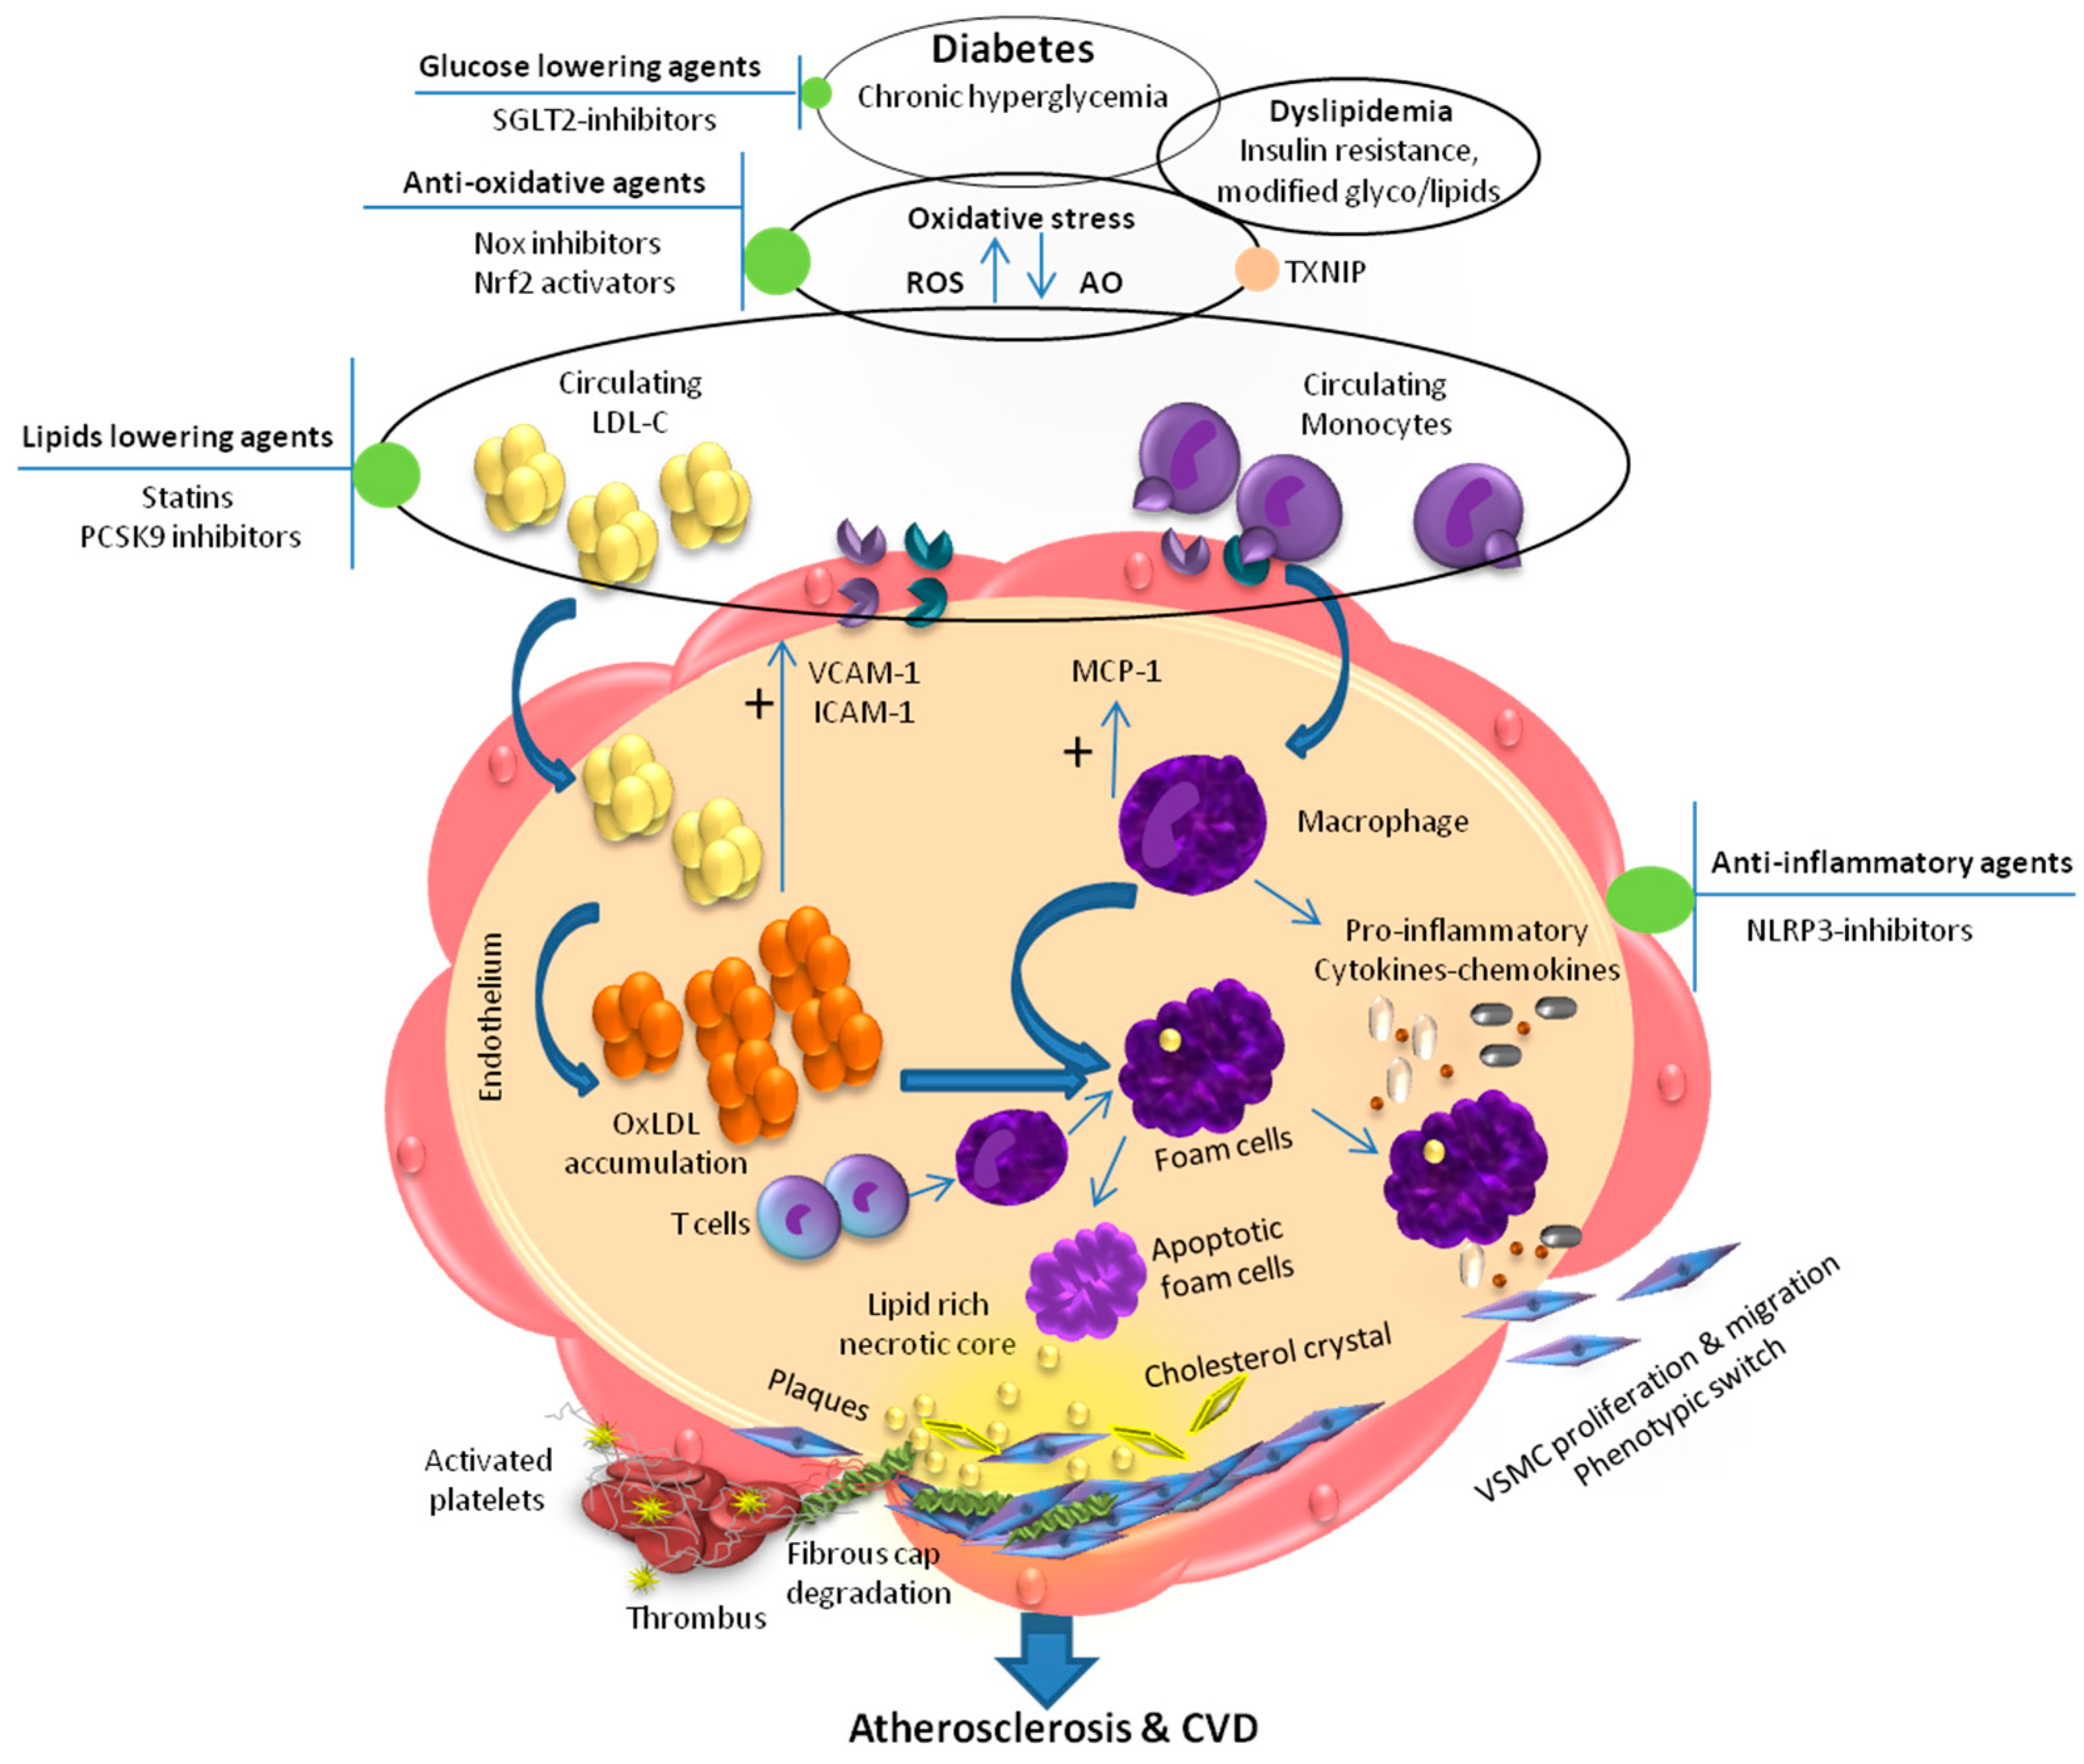 Biomedicines | Free Full-Text | Dyslipidemia, Diabetes and Atherosclerosis:  Role of Inflammation and ROS-Redox-Sensitive Factors